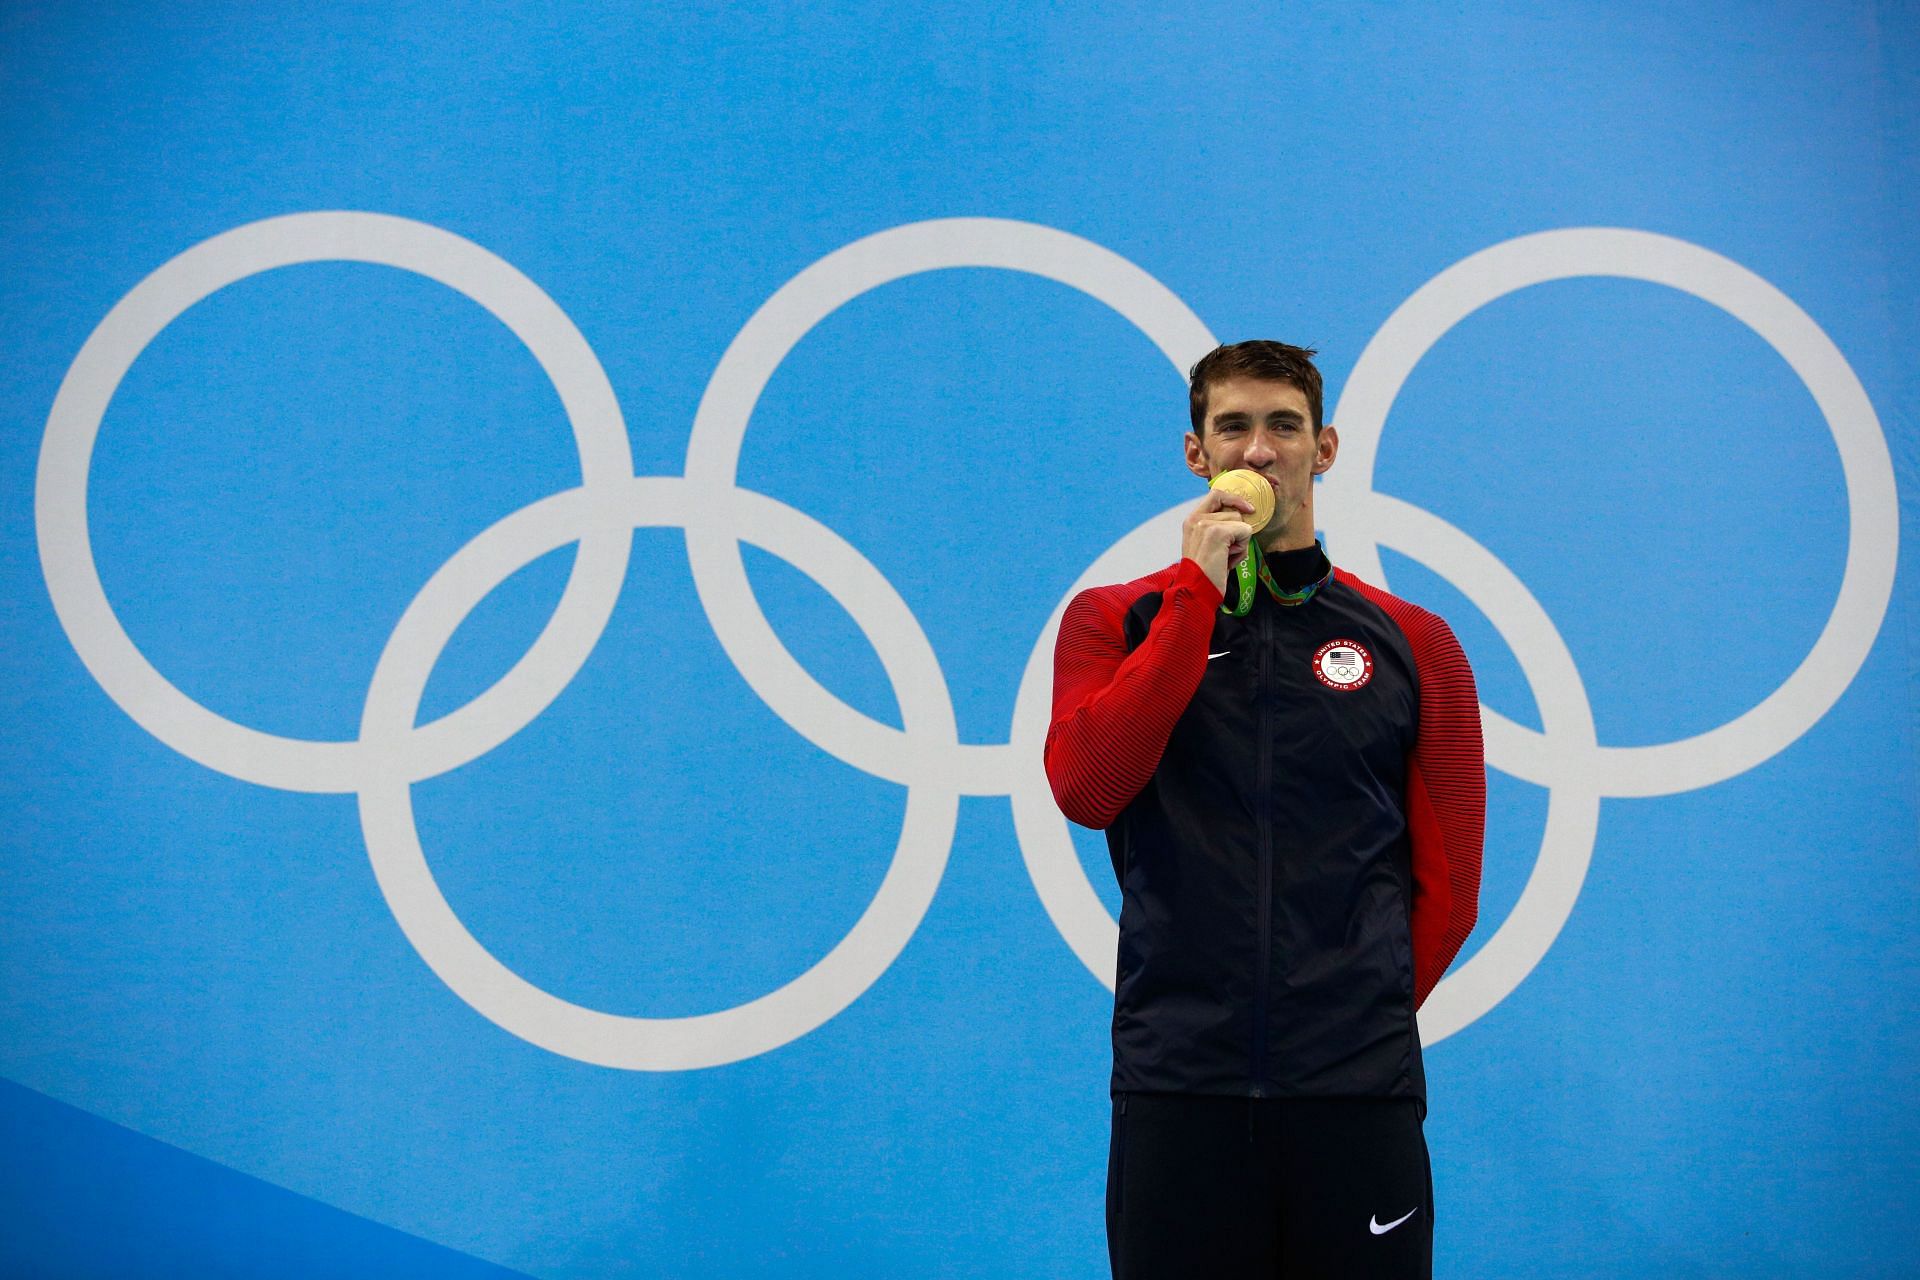 Swimming - Olympics: Day 4 (Image via Getty)